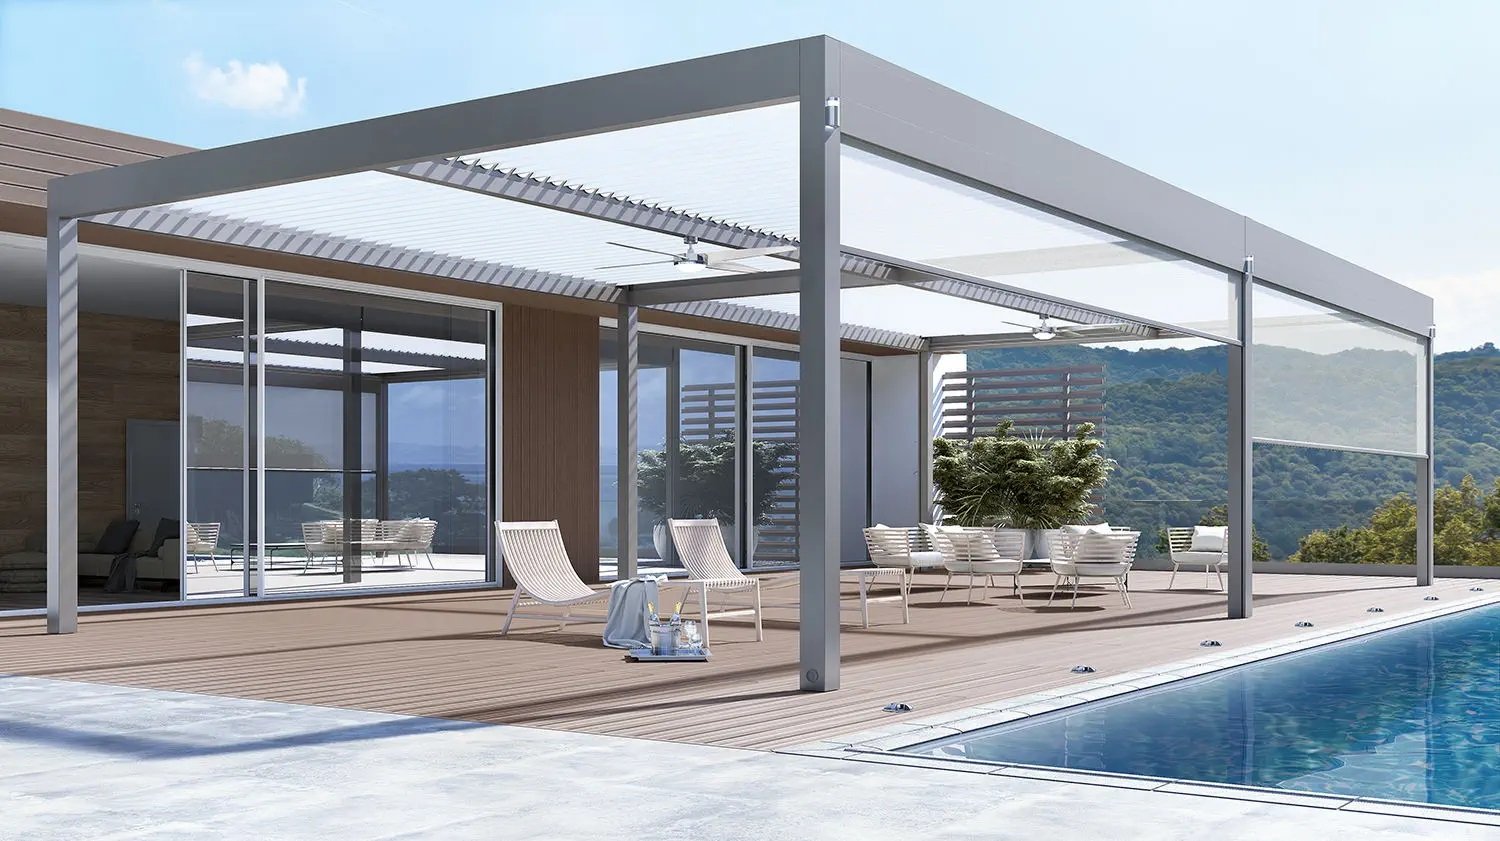 Aluminum pergola - Durable, lightweight, and stylish outdoor structure for year-round enjoyment.